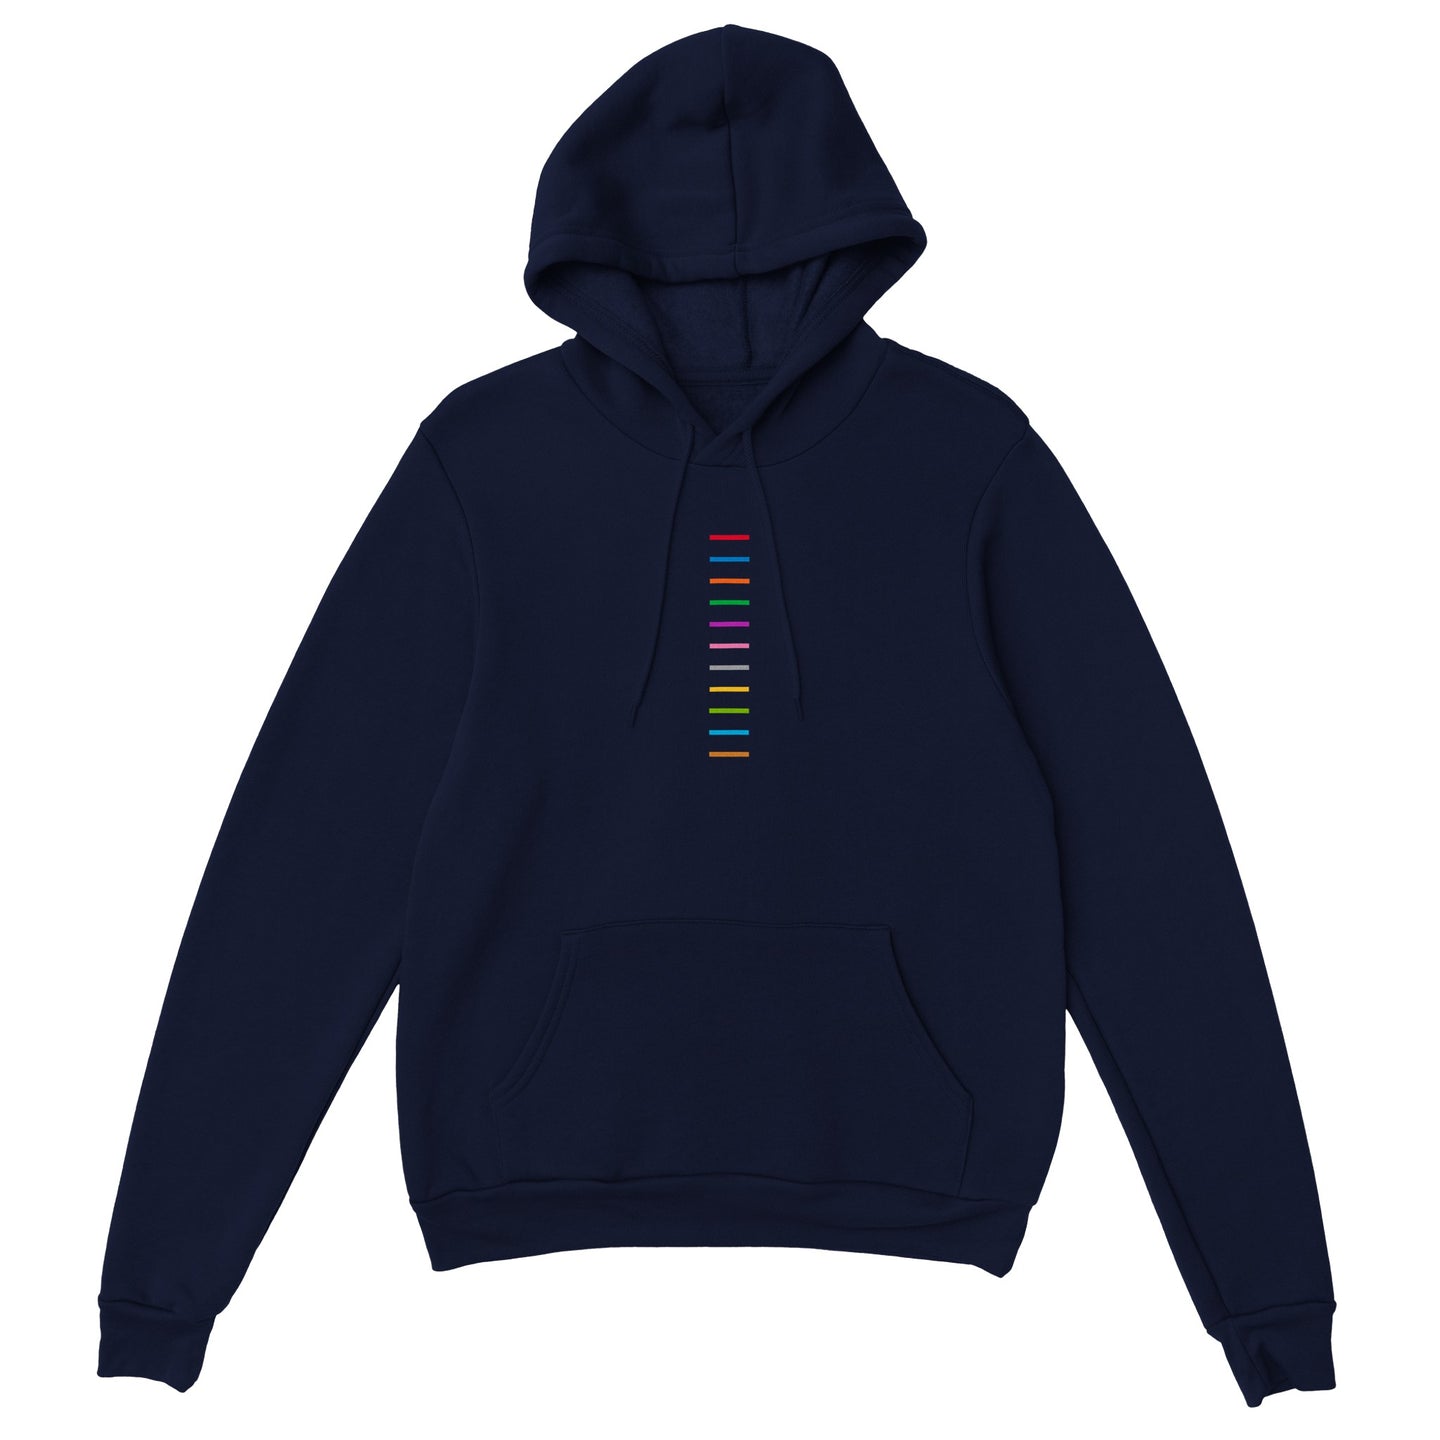 Feel The Colors . Hoodie Unisex Pullover Navy